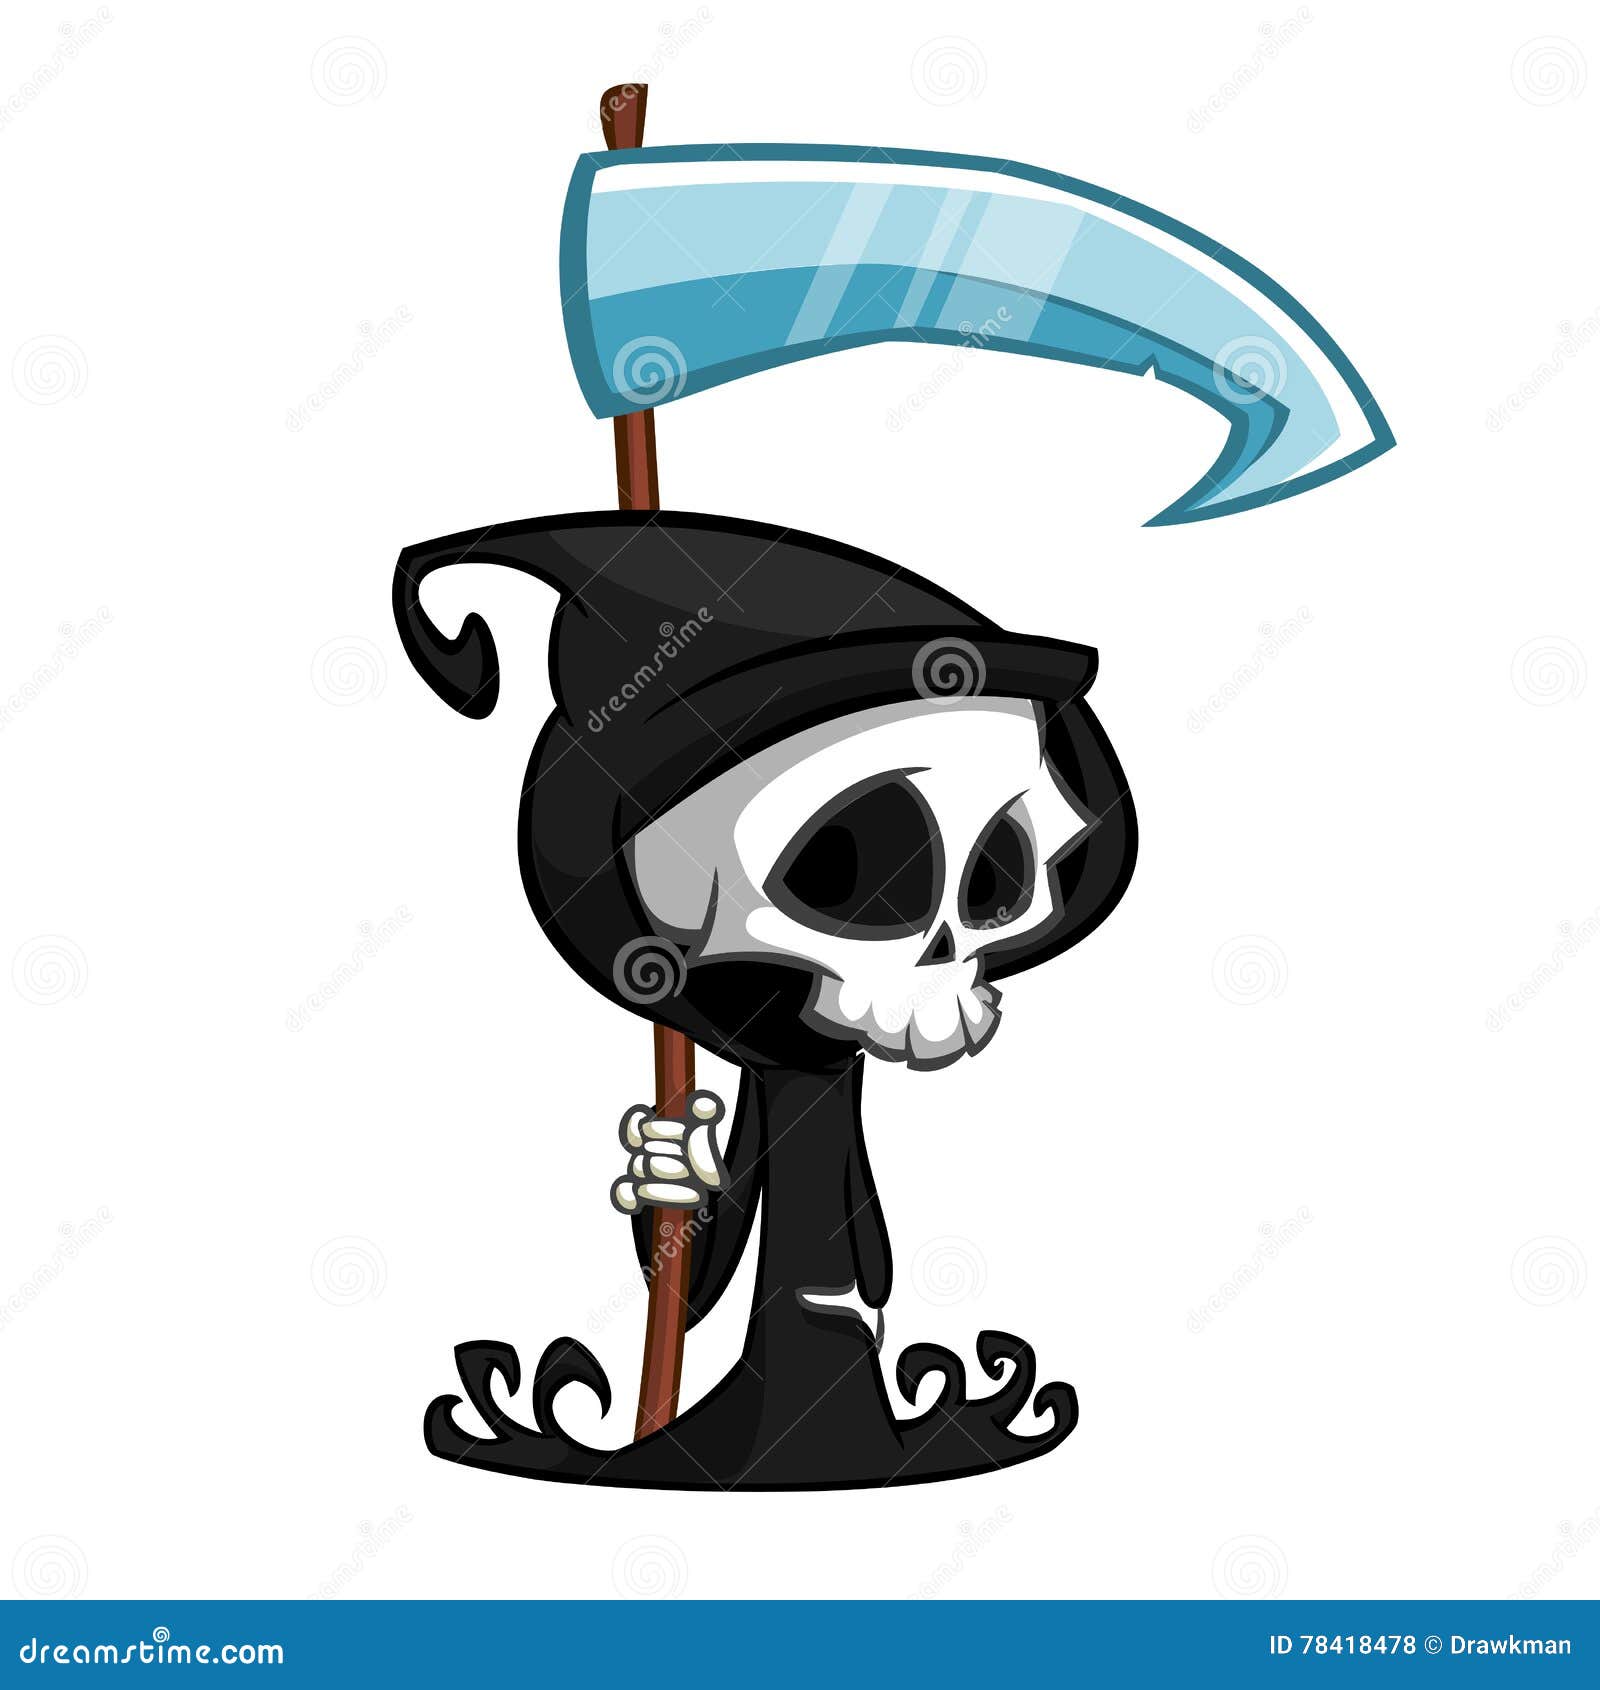 Cute Cartoon Grim Reaper With Scythe Isolated On White